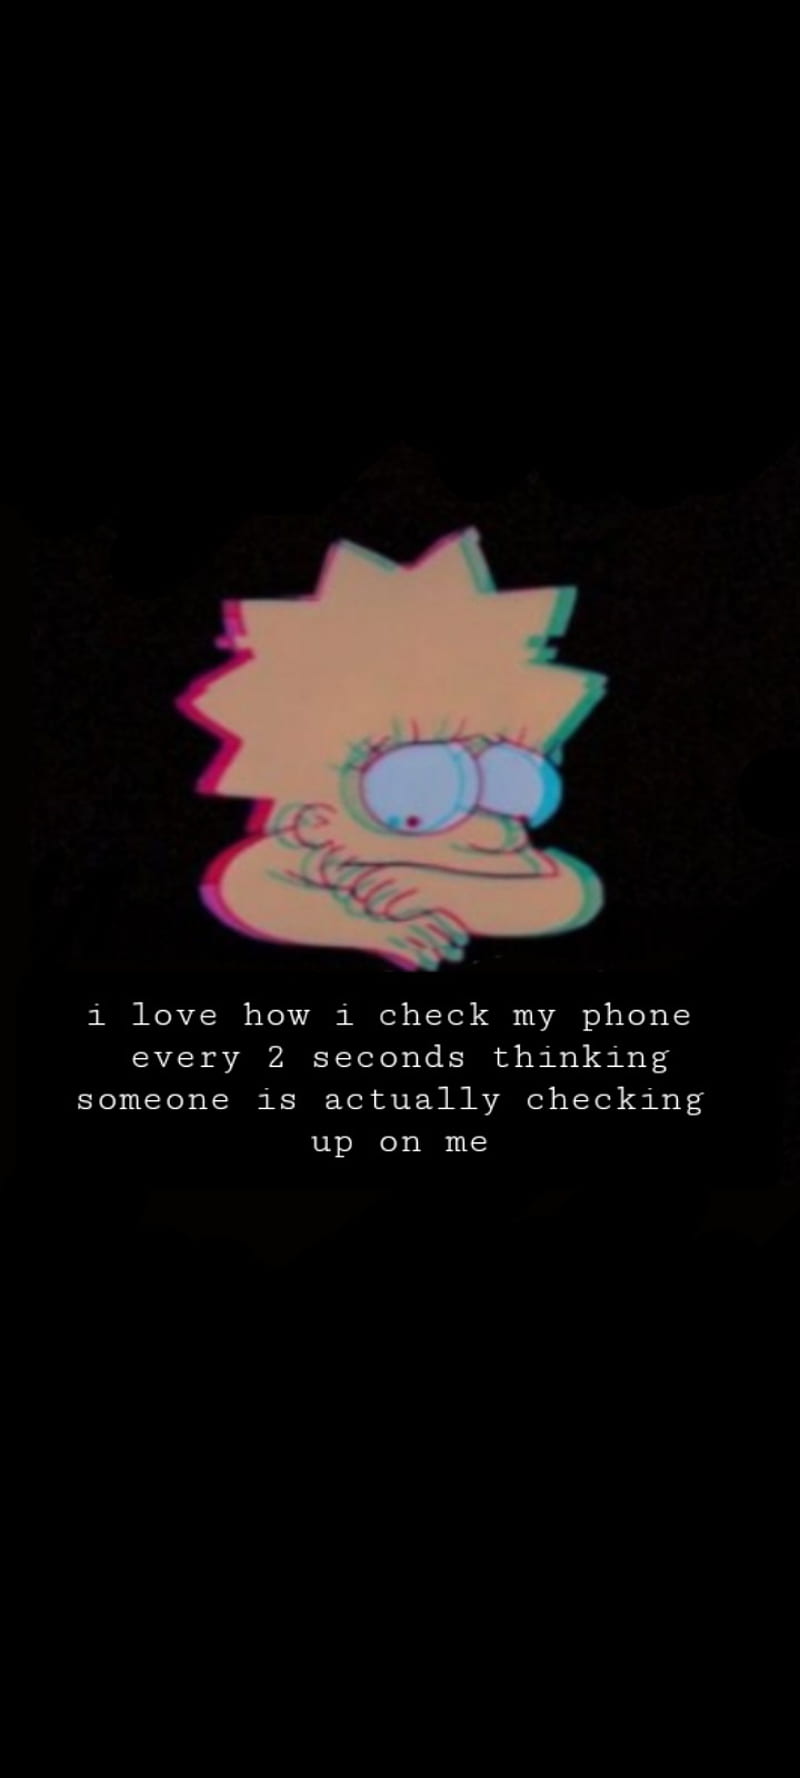 A black background with a picture of Lisa Simpson and text that says 